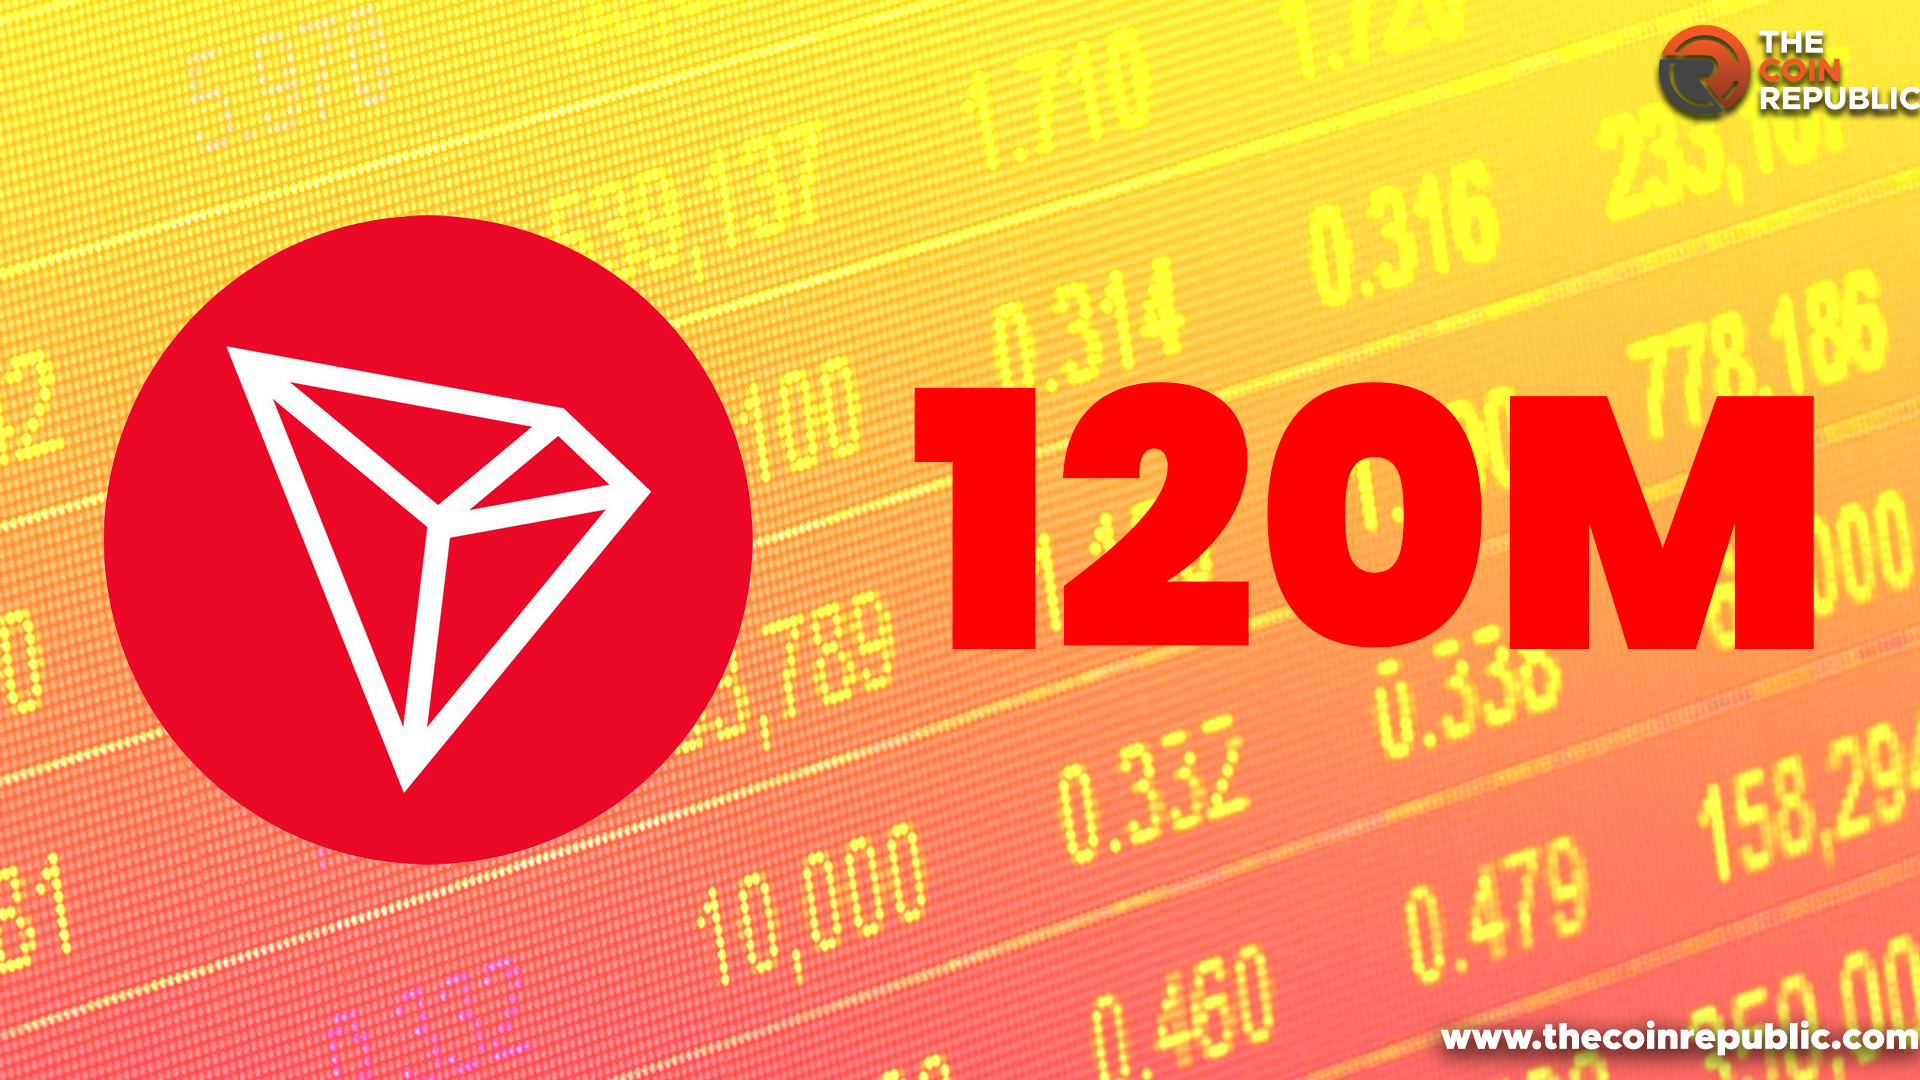 What Does it Mean for Tron Hitting 120 Million Accounts?